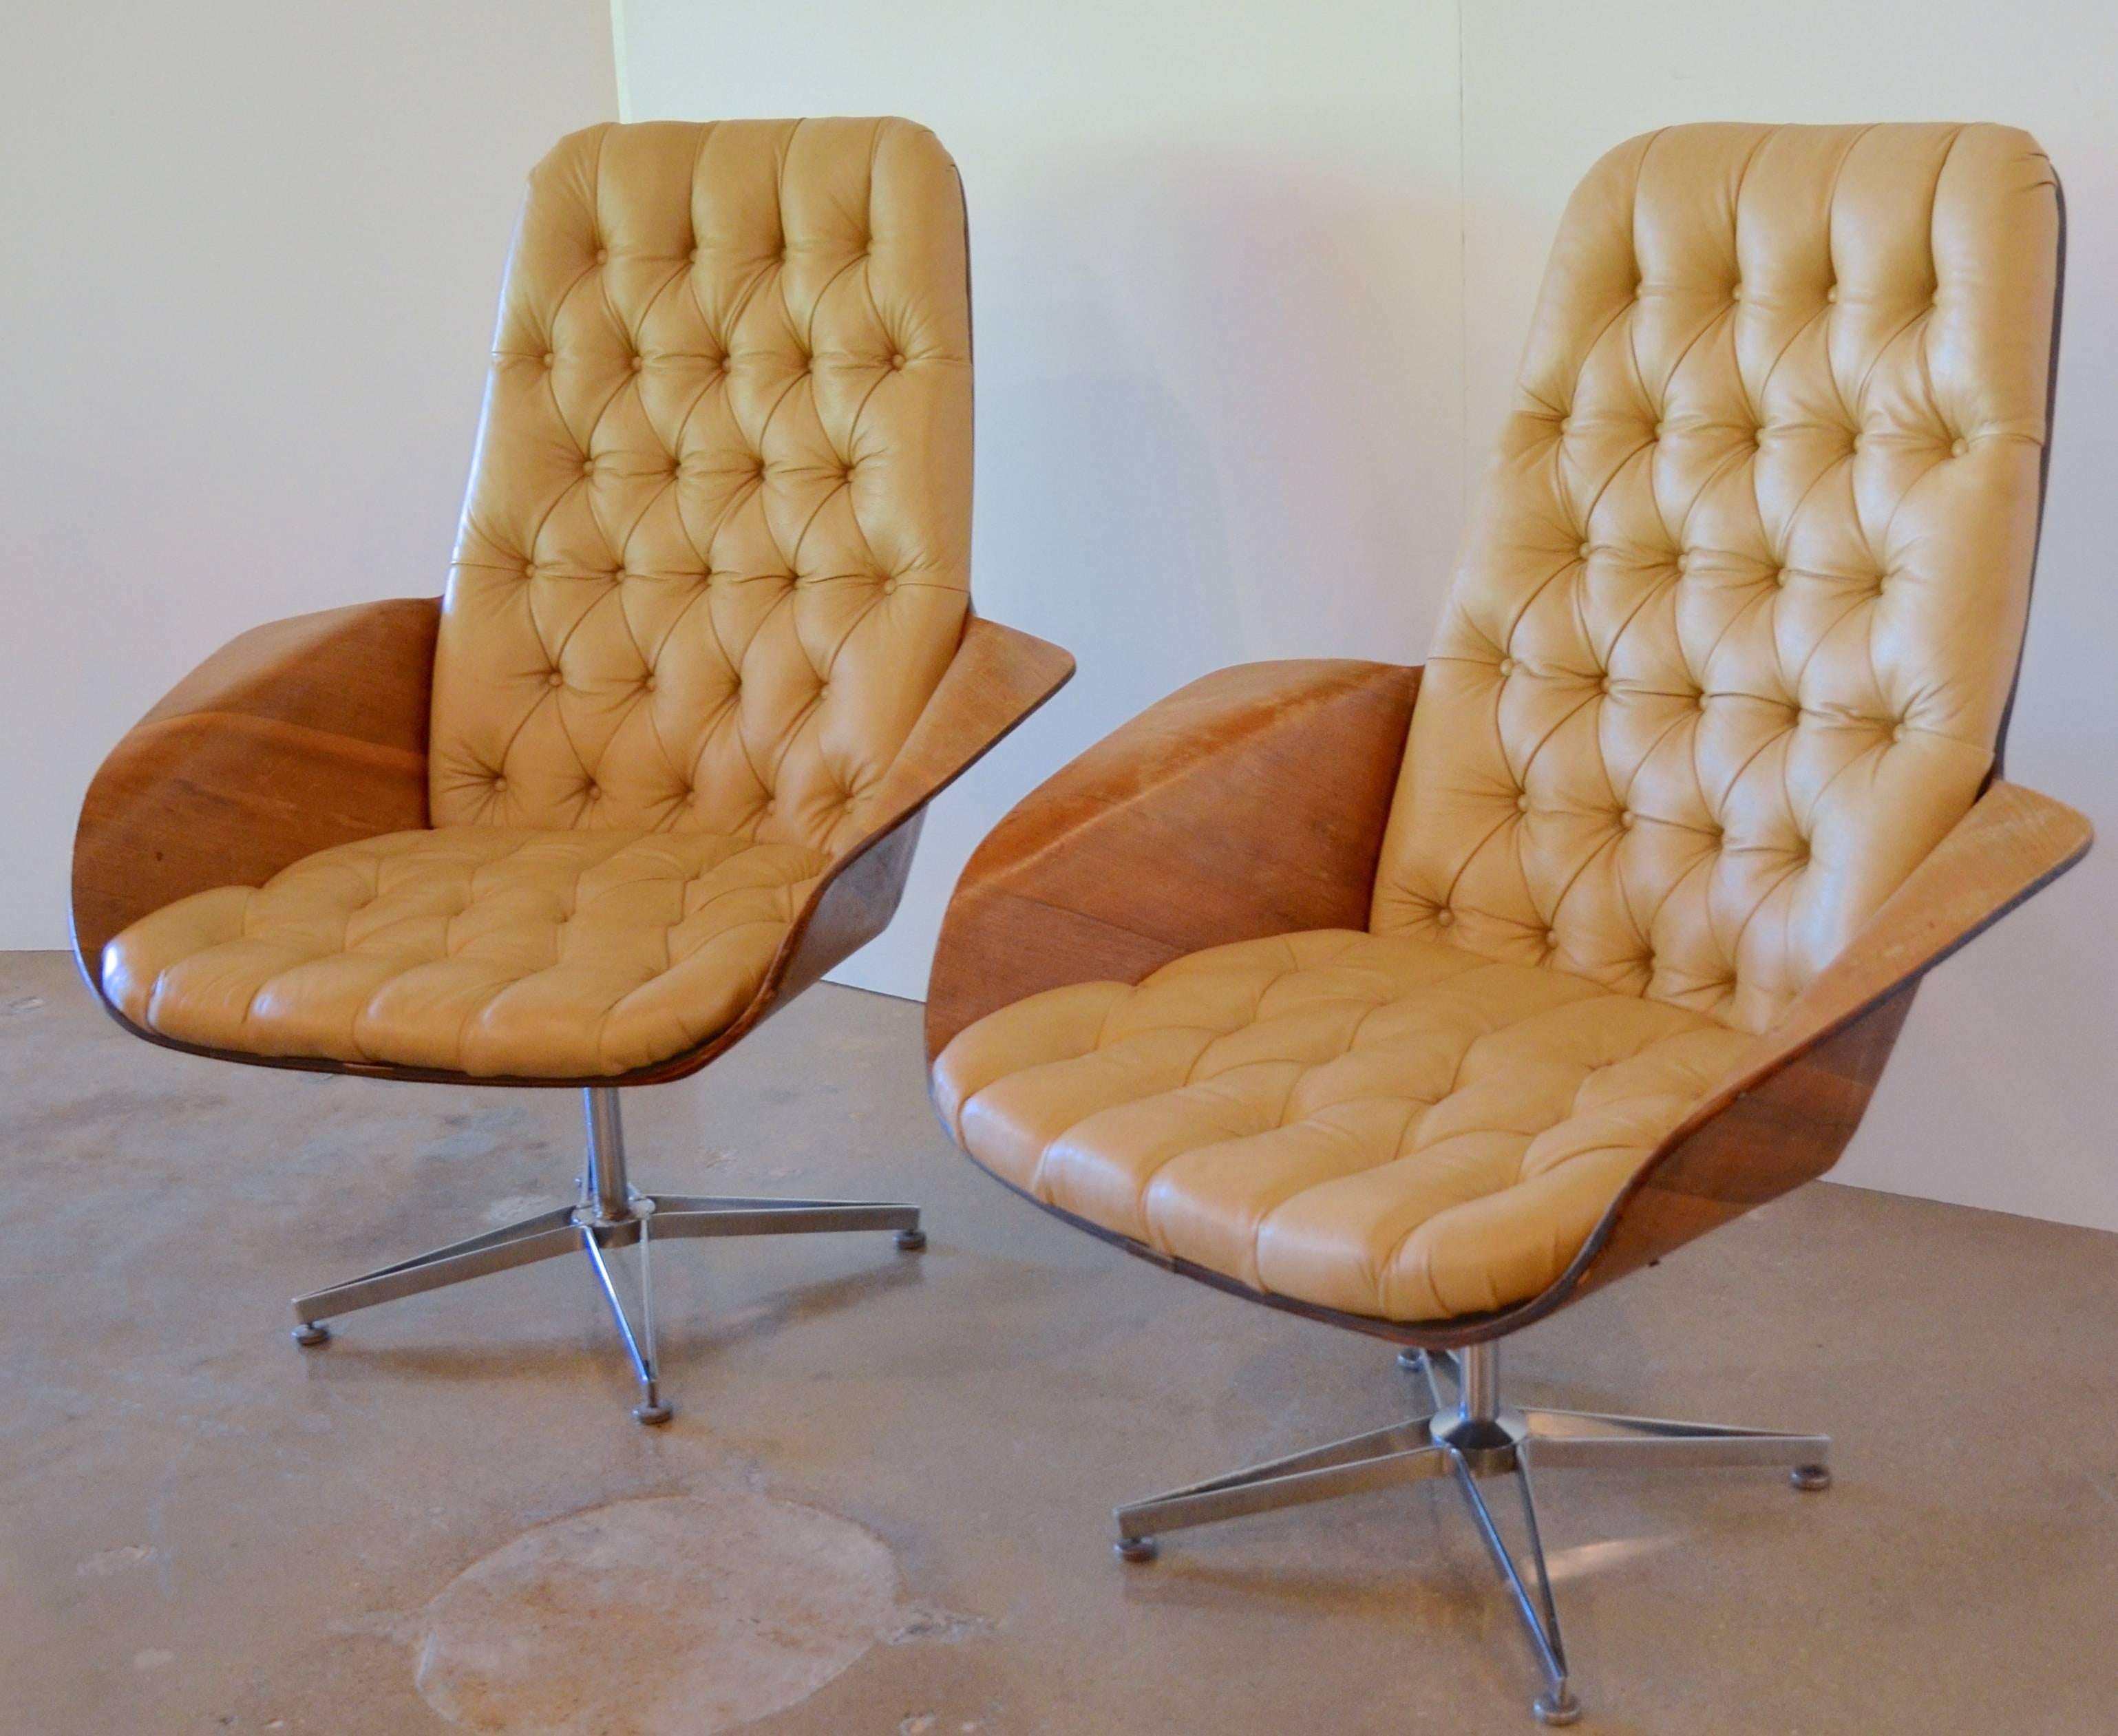 In true Madmen style we have a pair of bentwood swivel chairs by George Mulhauser for Plycraft, USA. With a bentwood walnut shell, the chairs feature tufted tan leather upholstery and a modified chrome swivel base. Label on bottom of chairs